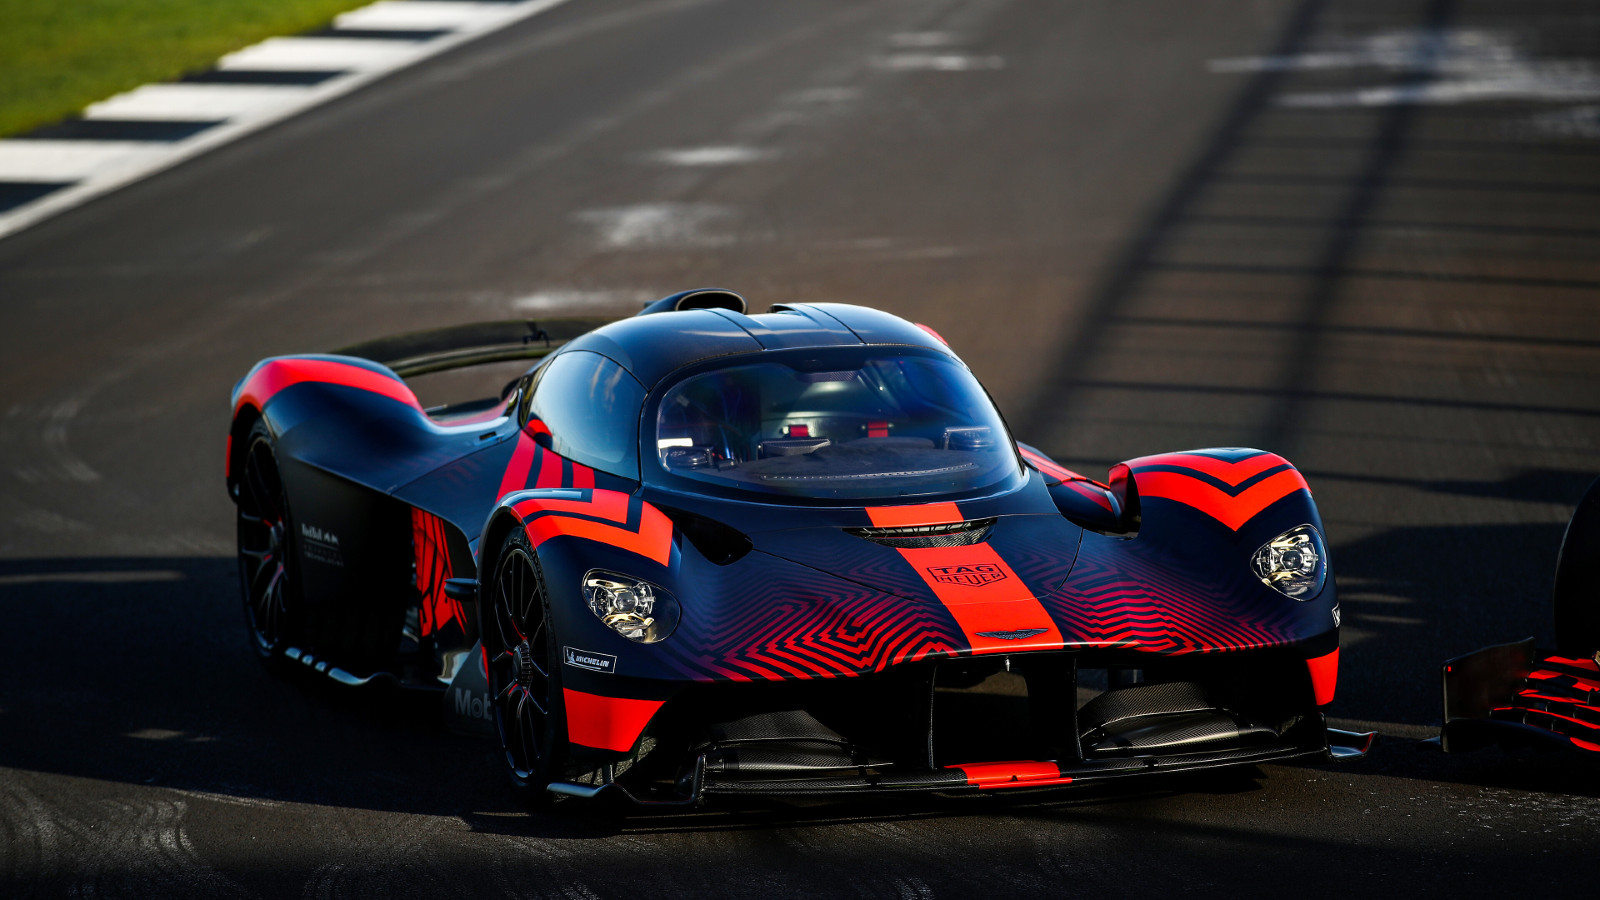 Aston Martin's Valkyrie, as owned by Max Verstappen.